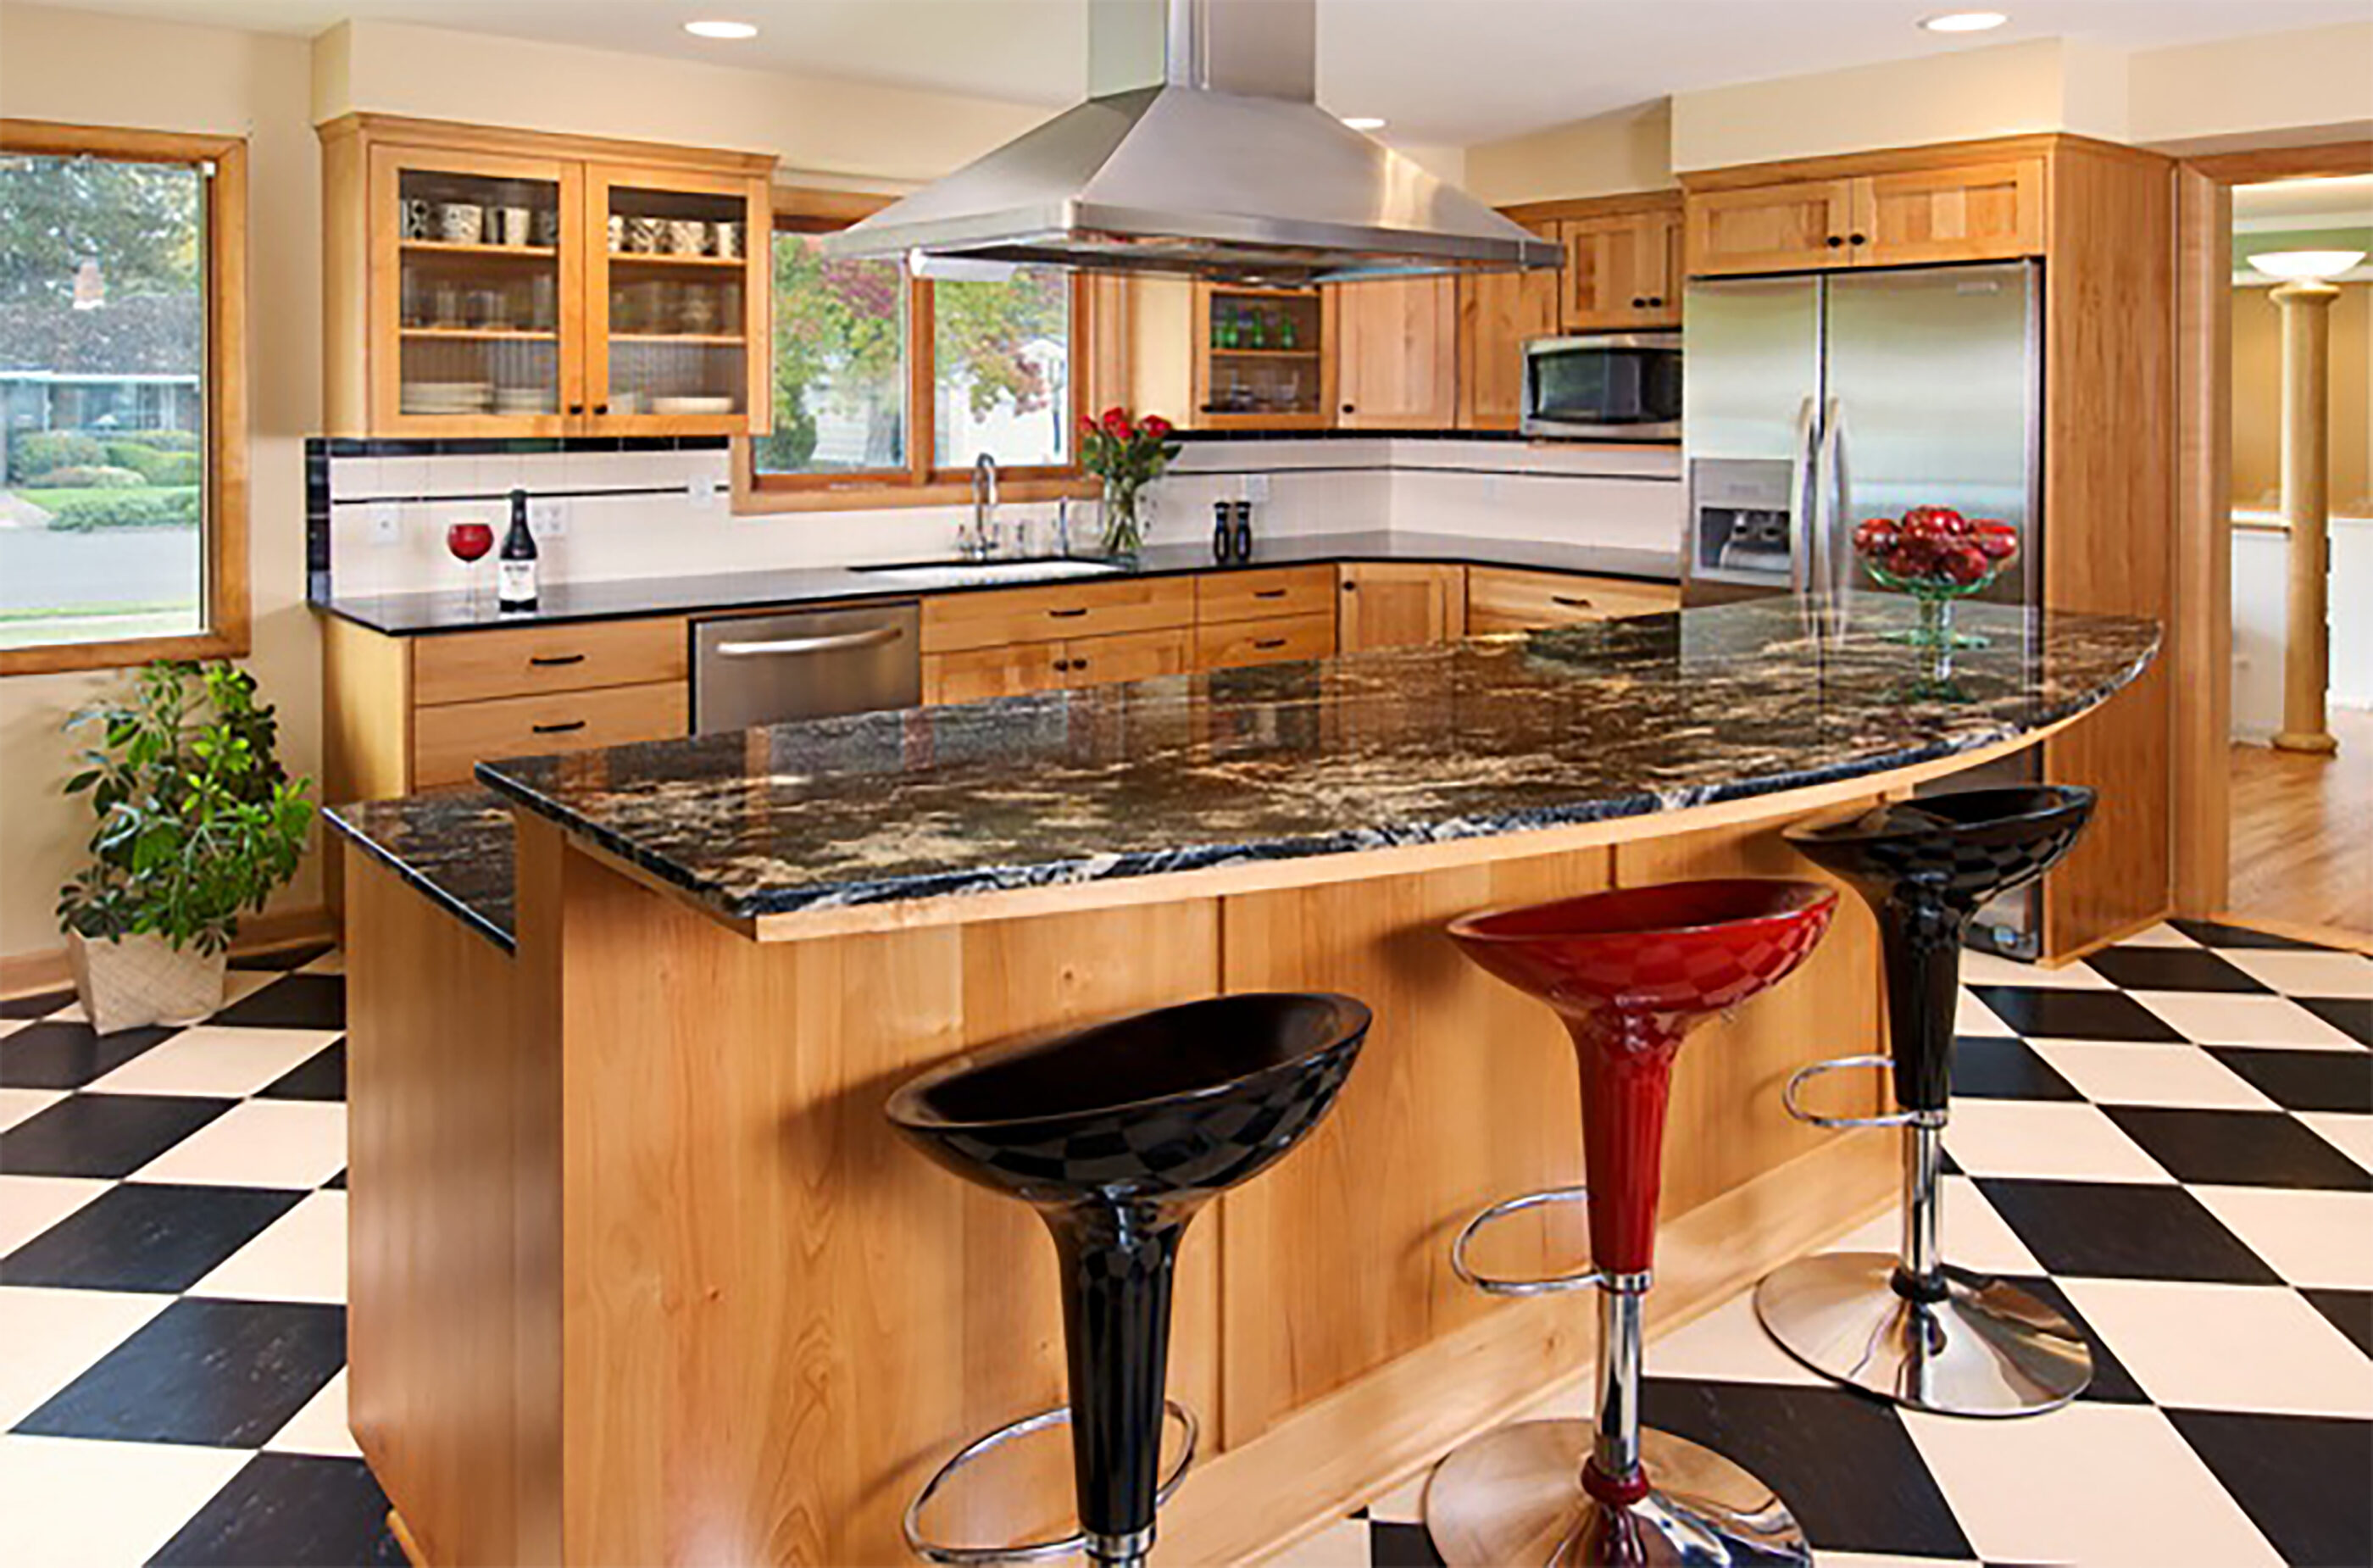 Striking barstools and granite countertops create a nice focal point in this kitchen remodel.